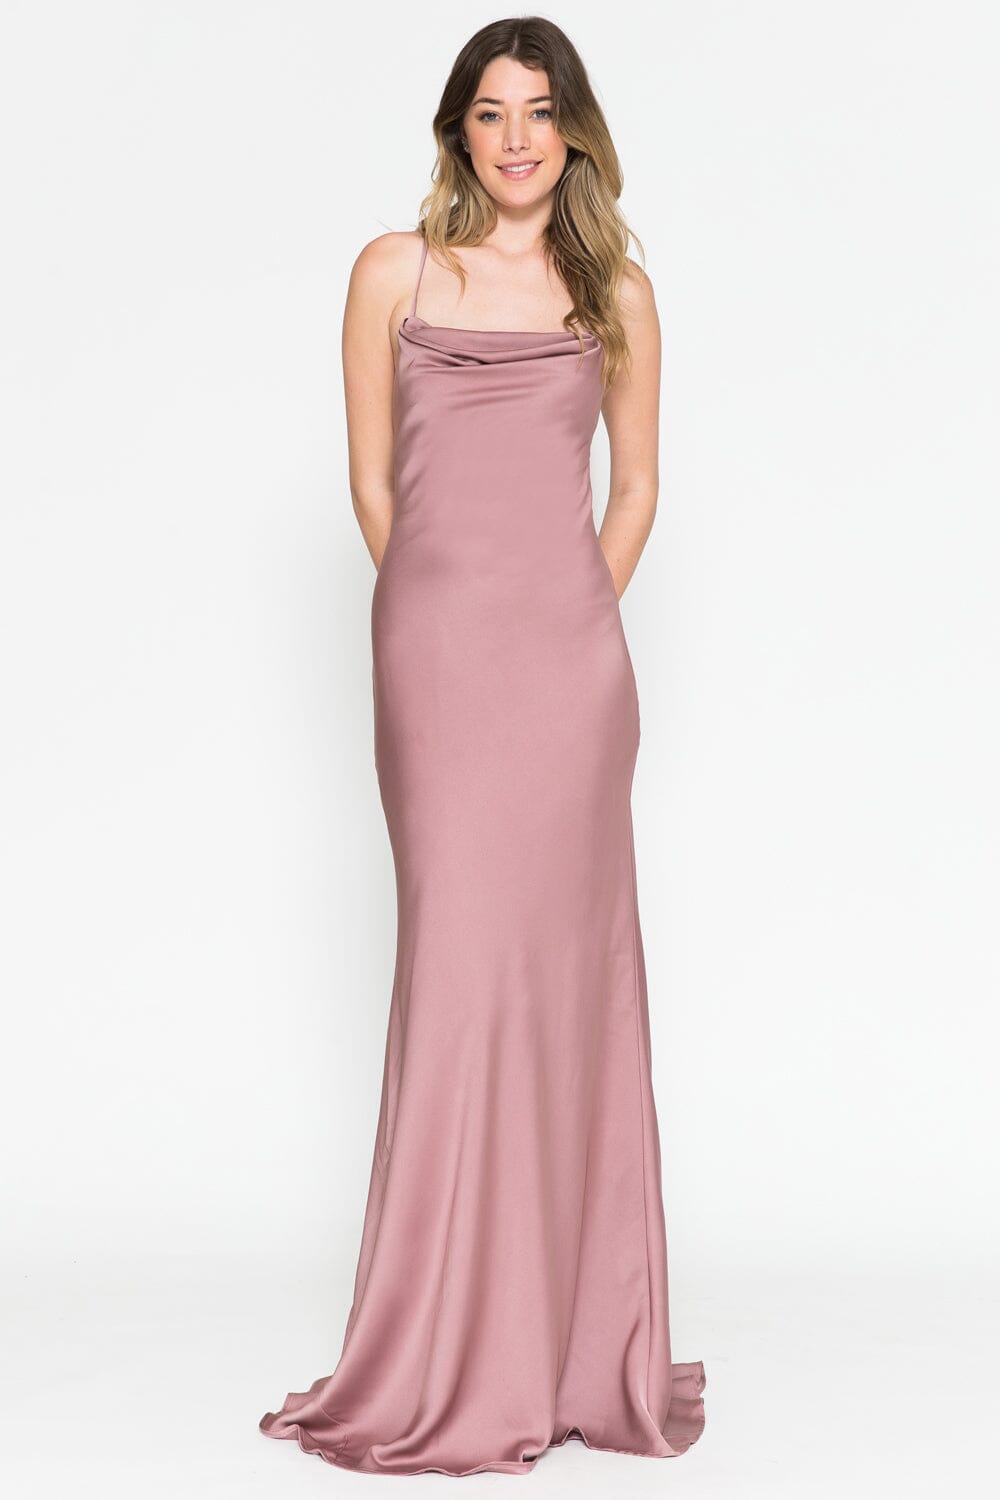 Satin Long Sleeveless Cowl Dress by Amelia Couture 6111